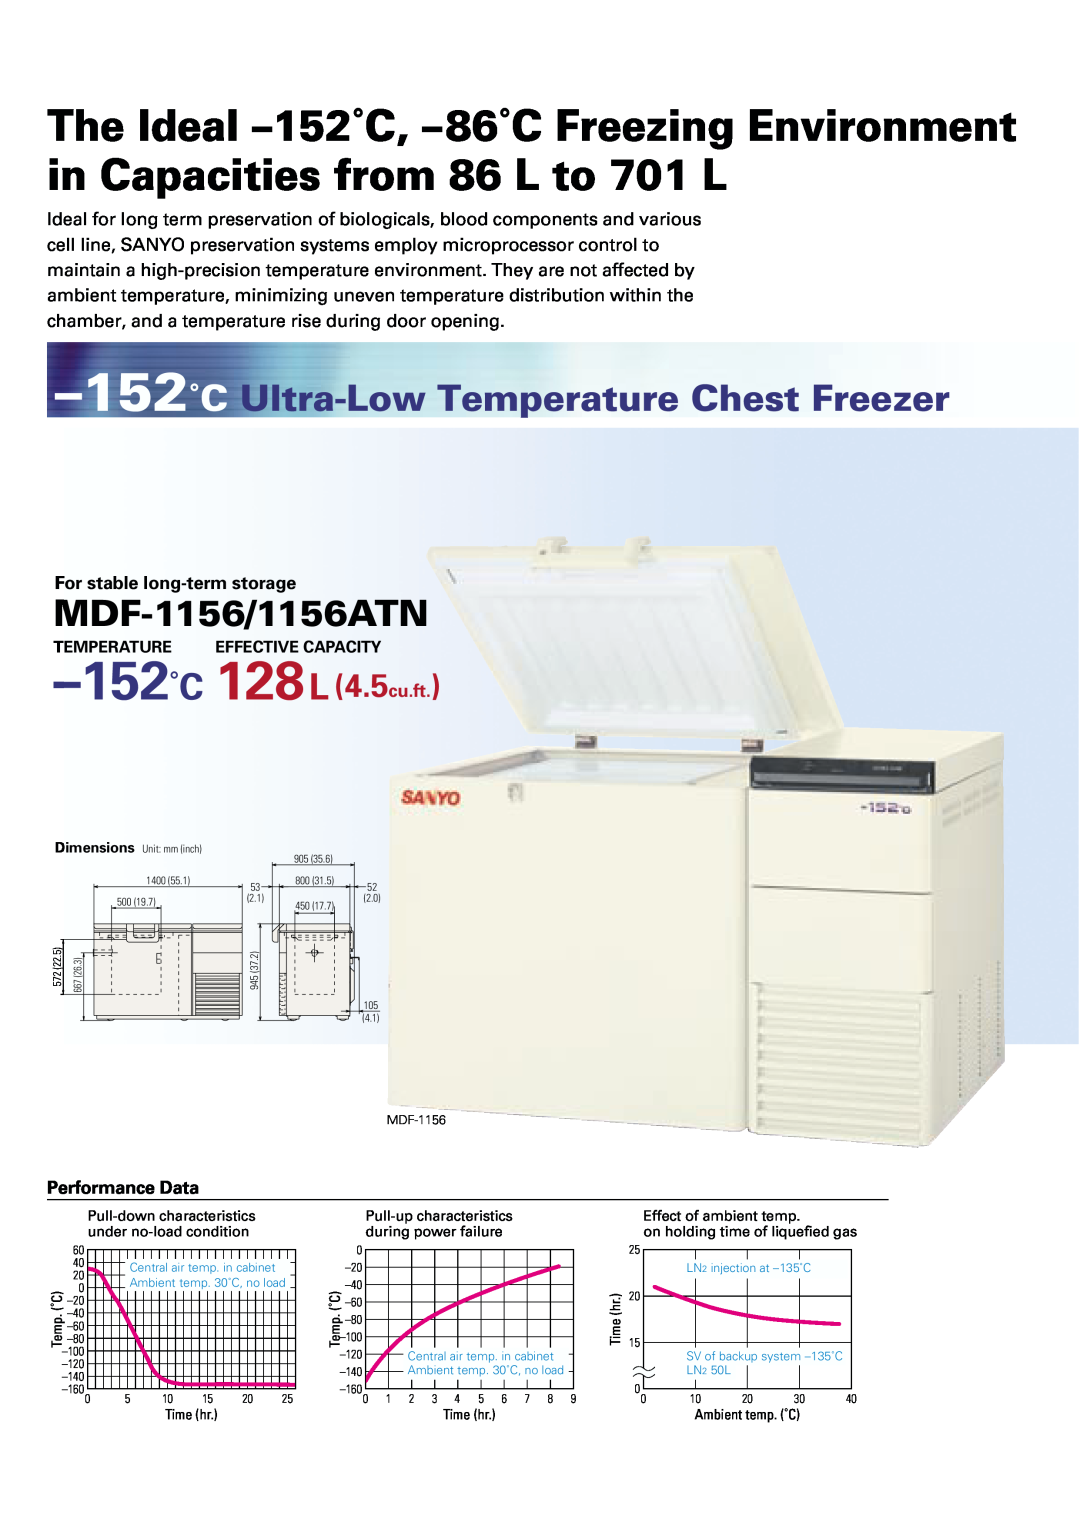 Sanyo MDF-1156ATN manual 152˚C Ultra-LowTemperature Chest Freezer, MDF-1156/1156ATN, For stable long-termstorage 